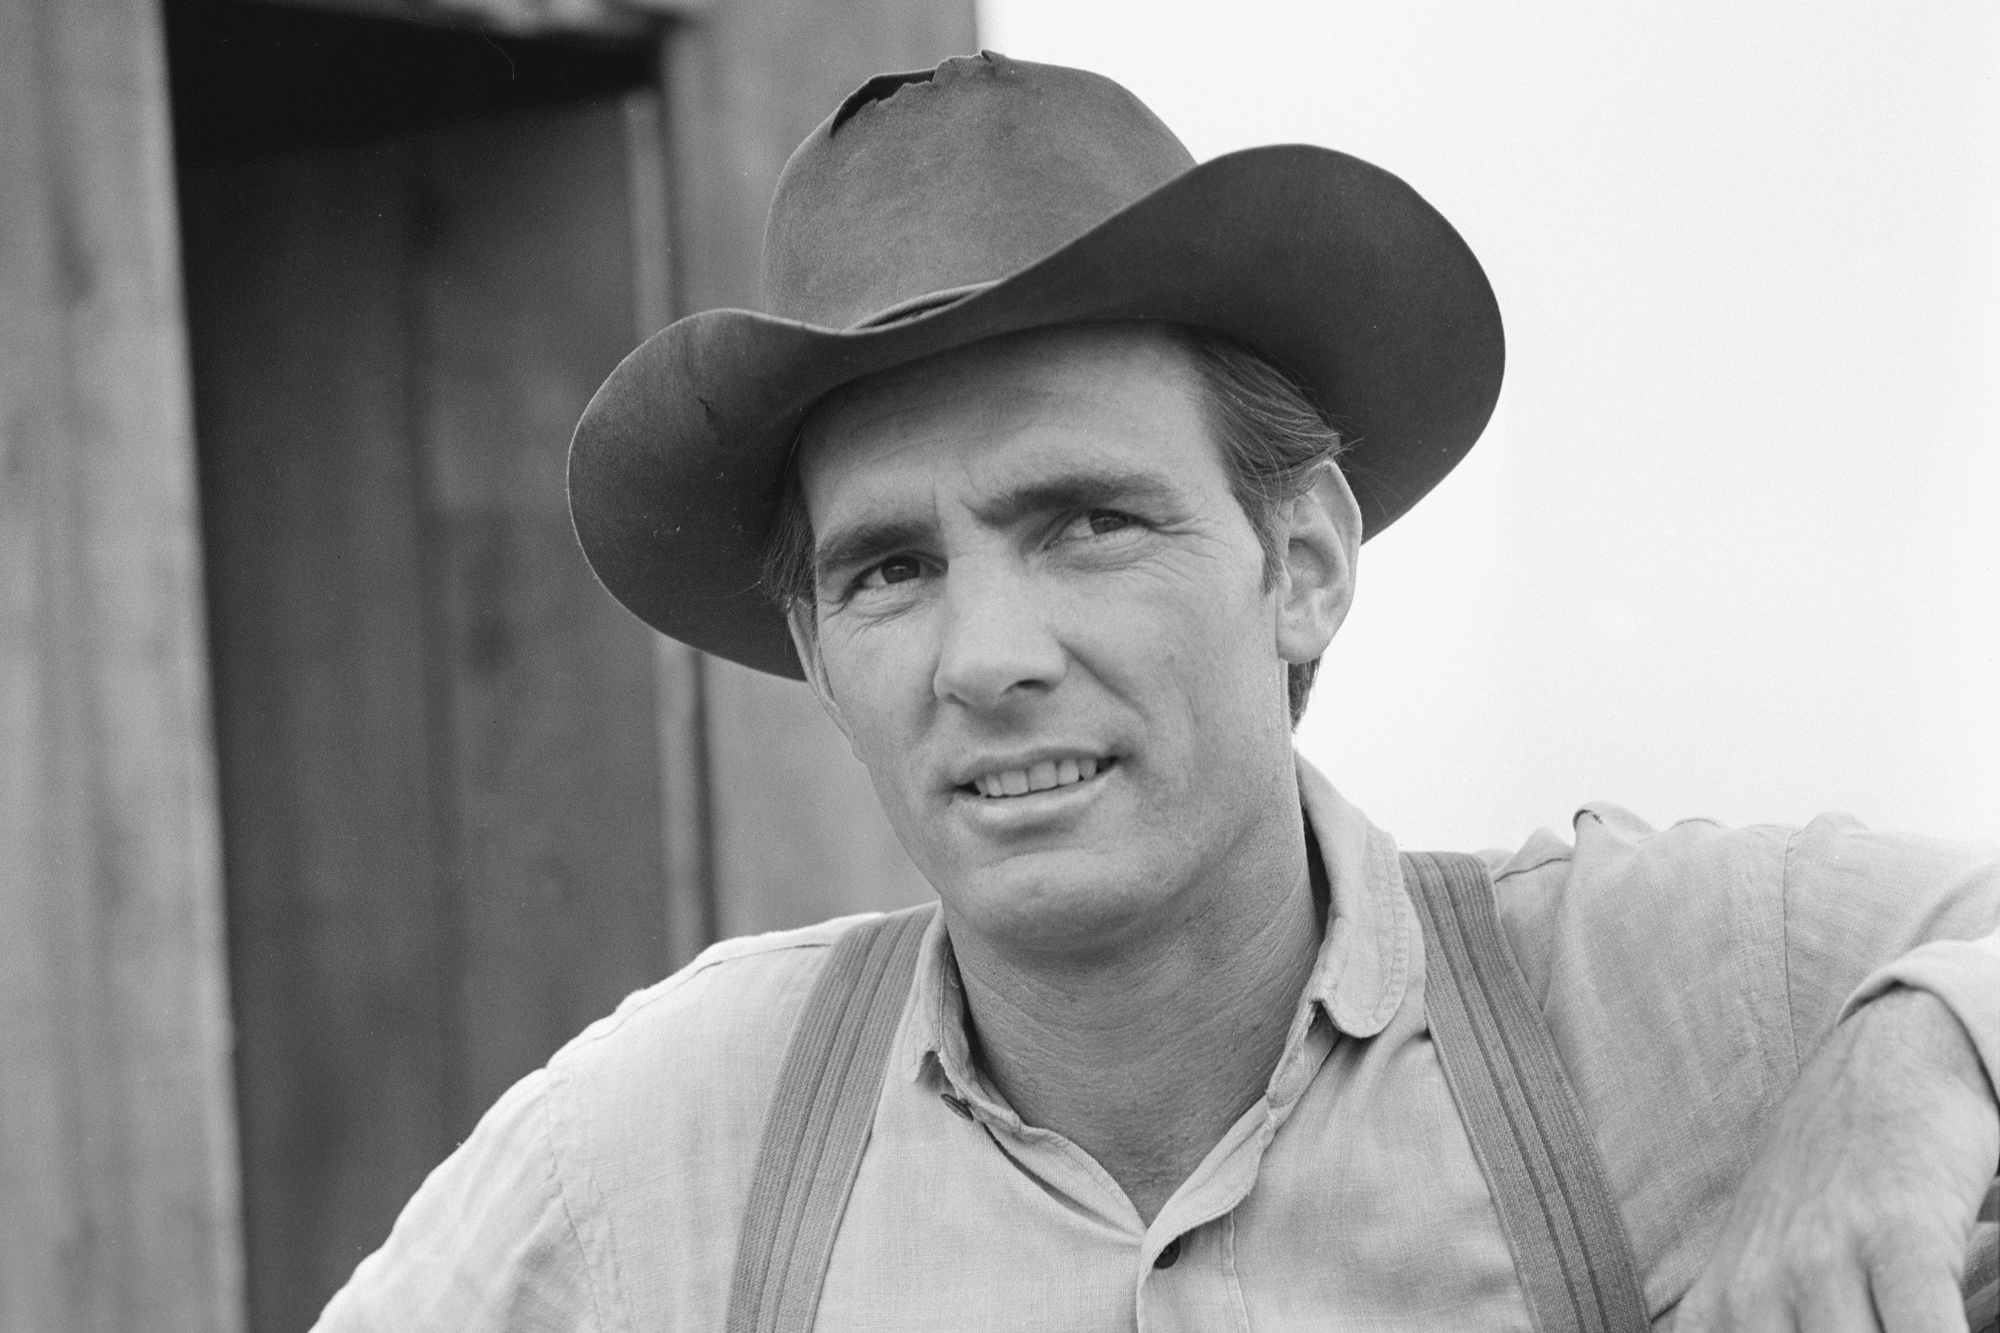 'Gunsmoke' Dennis Weaver as Chester Goode wearing a cowboy hat and overalls smiling.